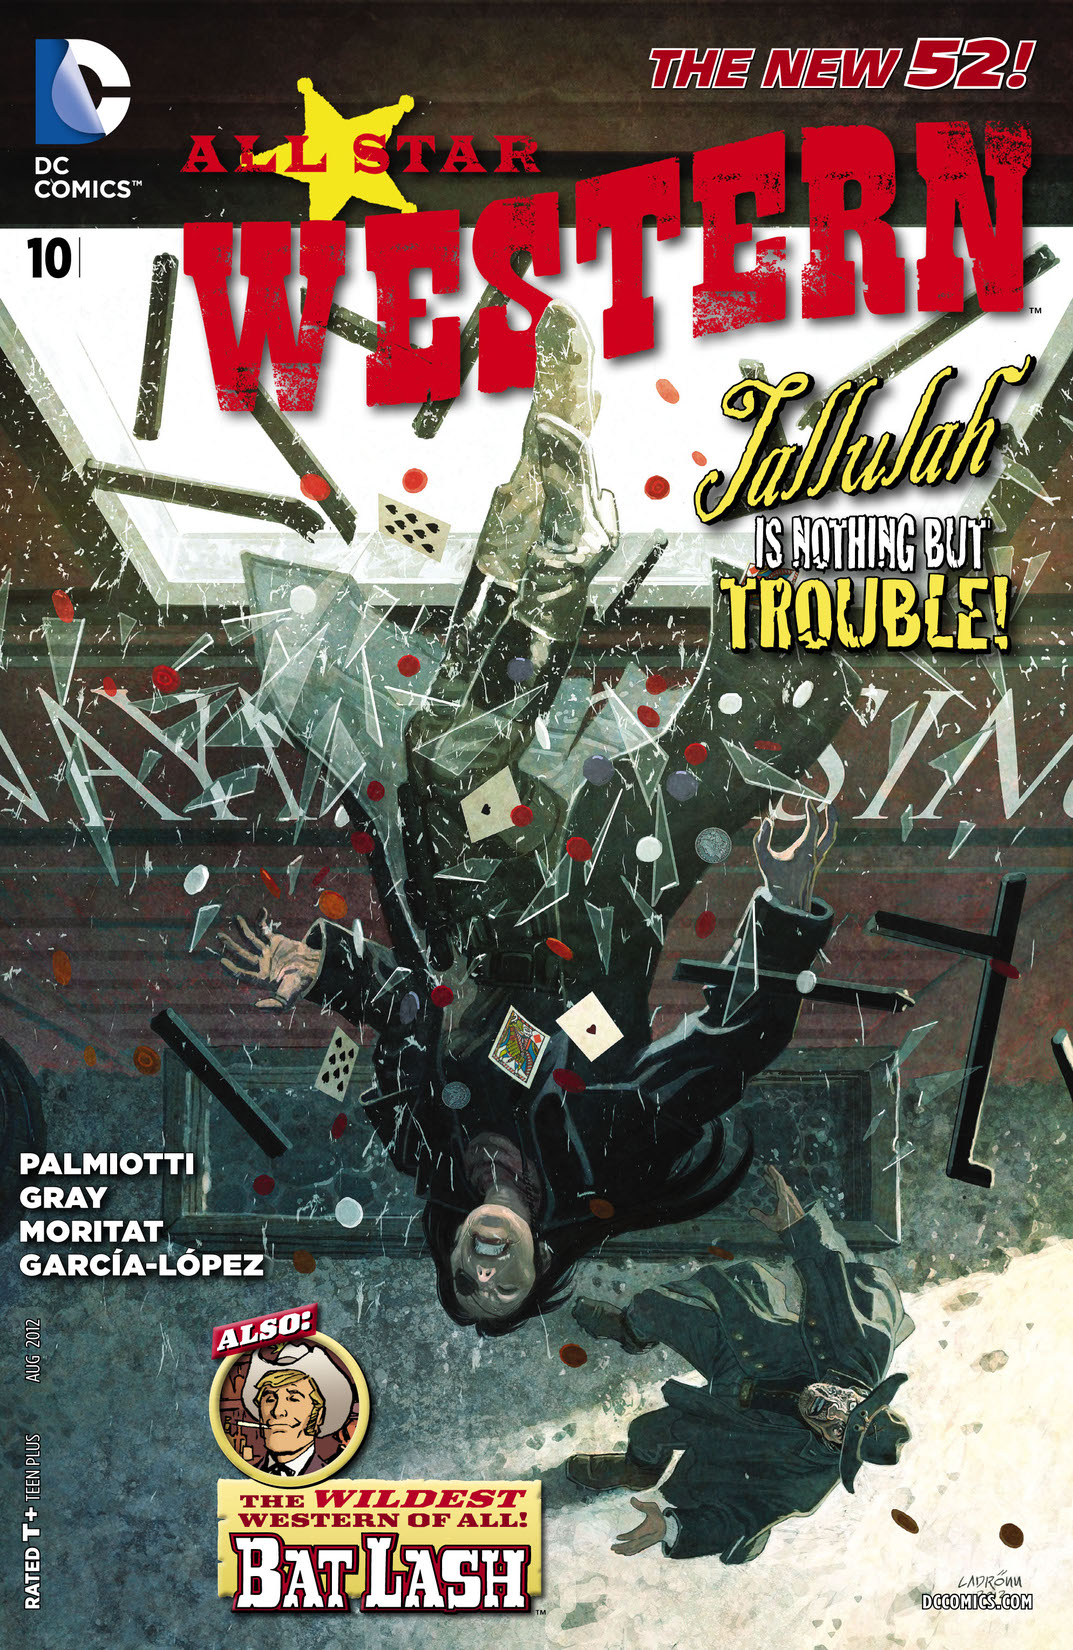 All Star Western #10 preview images